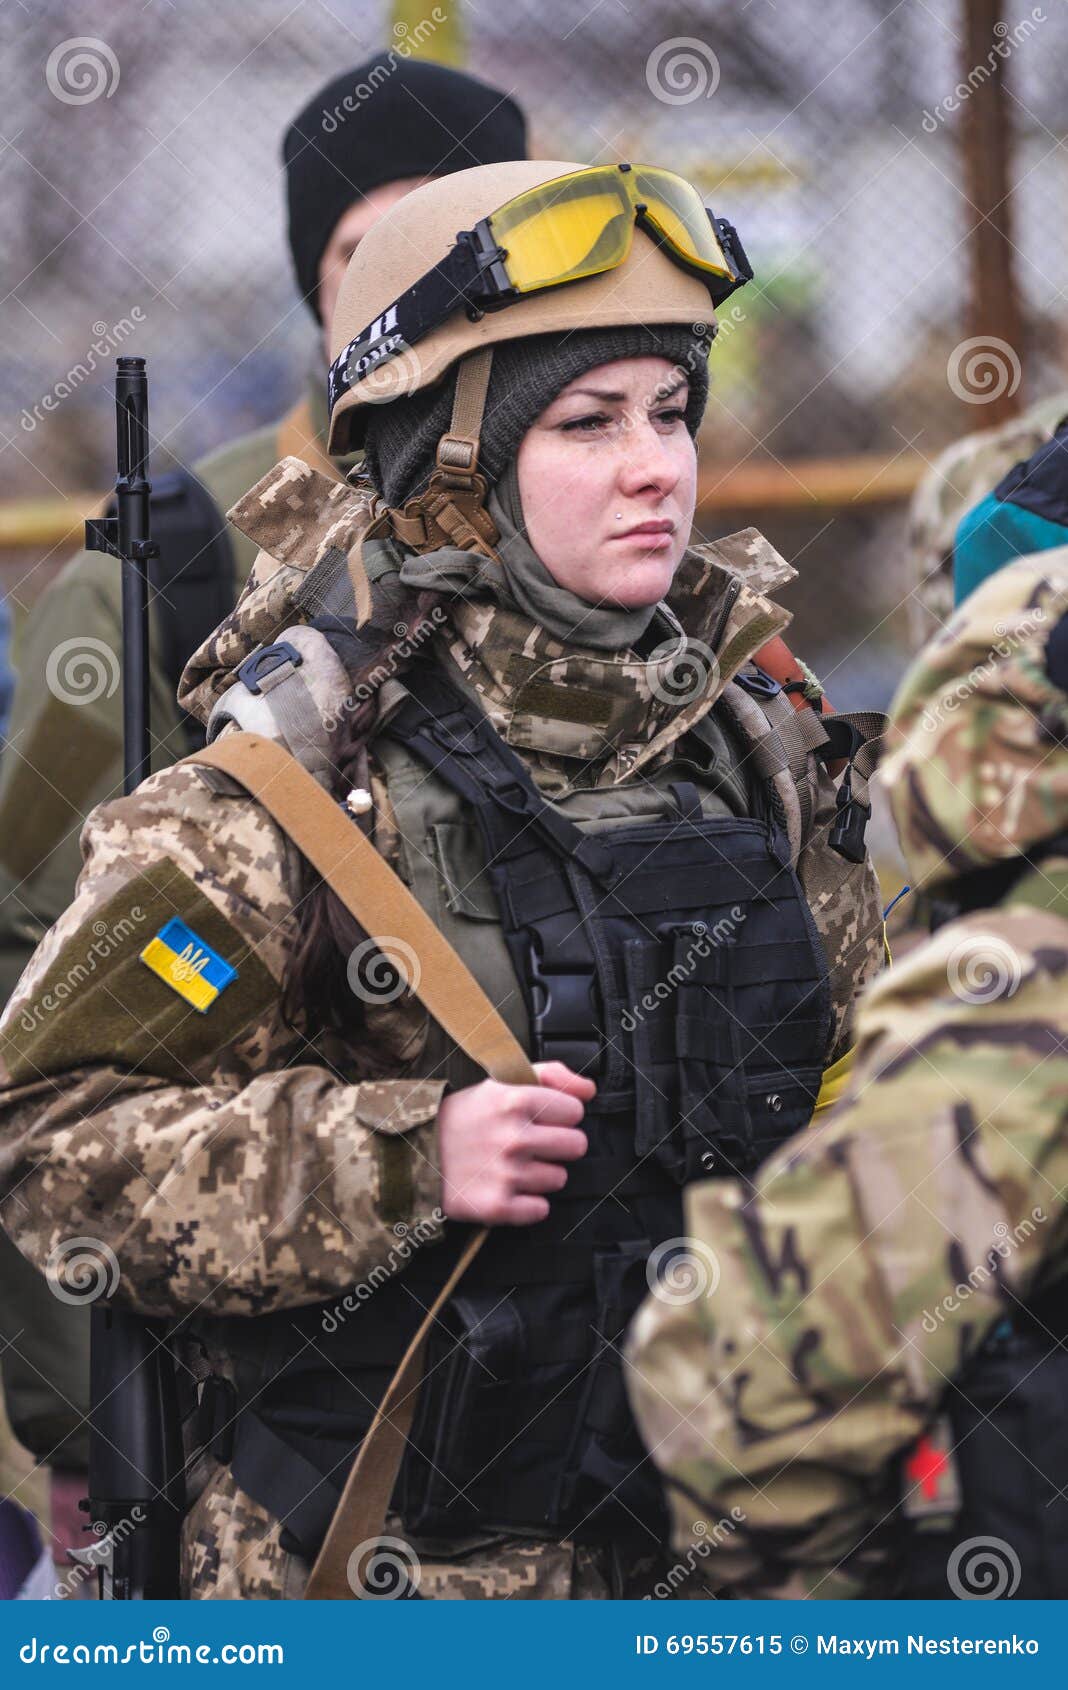 Girl with gun in uniform editorial image. Image of camouflage - 69557615